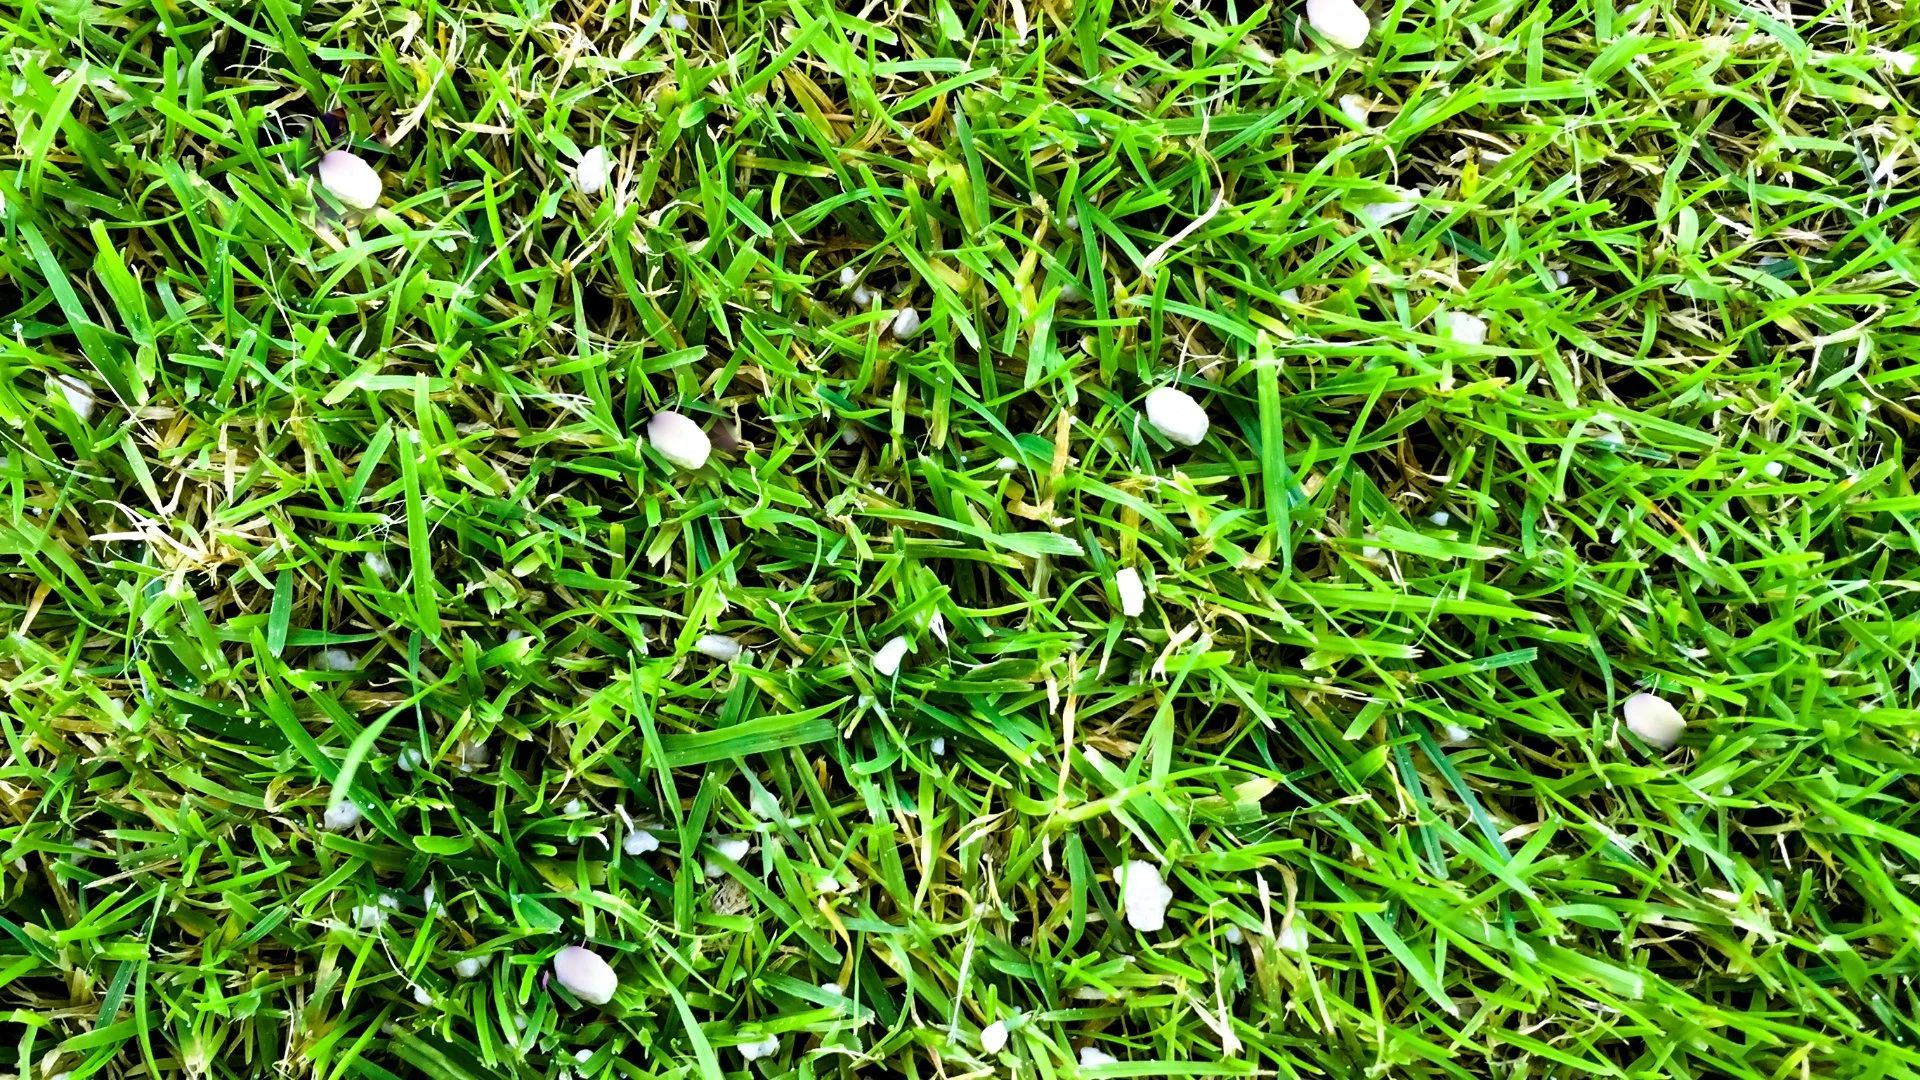 Should I Apply a Winterizer Fertilization Treatment to My Lawn This Fall?